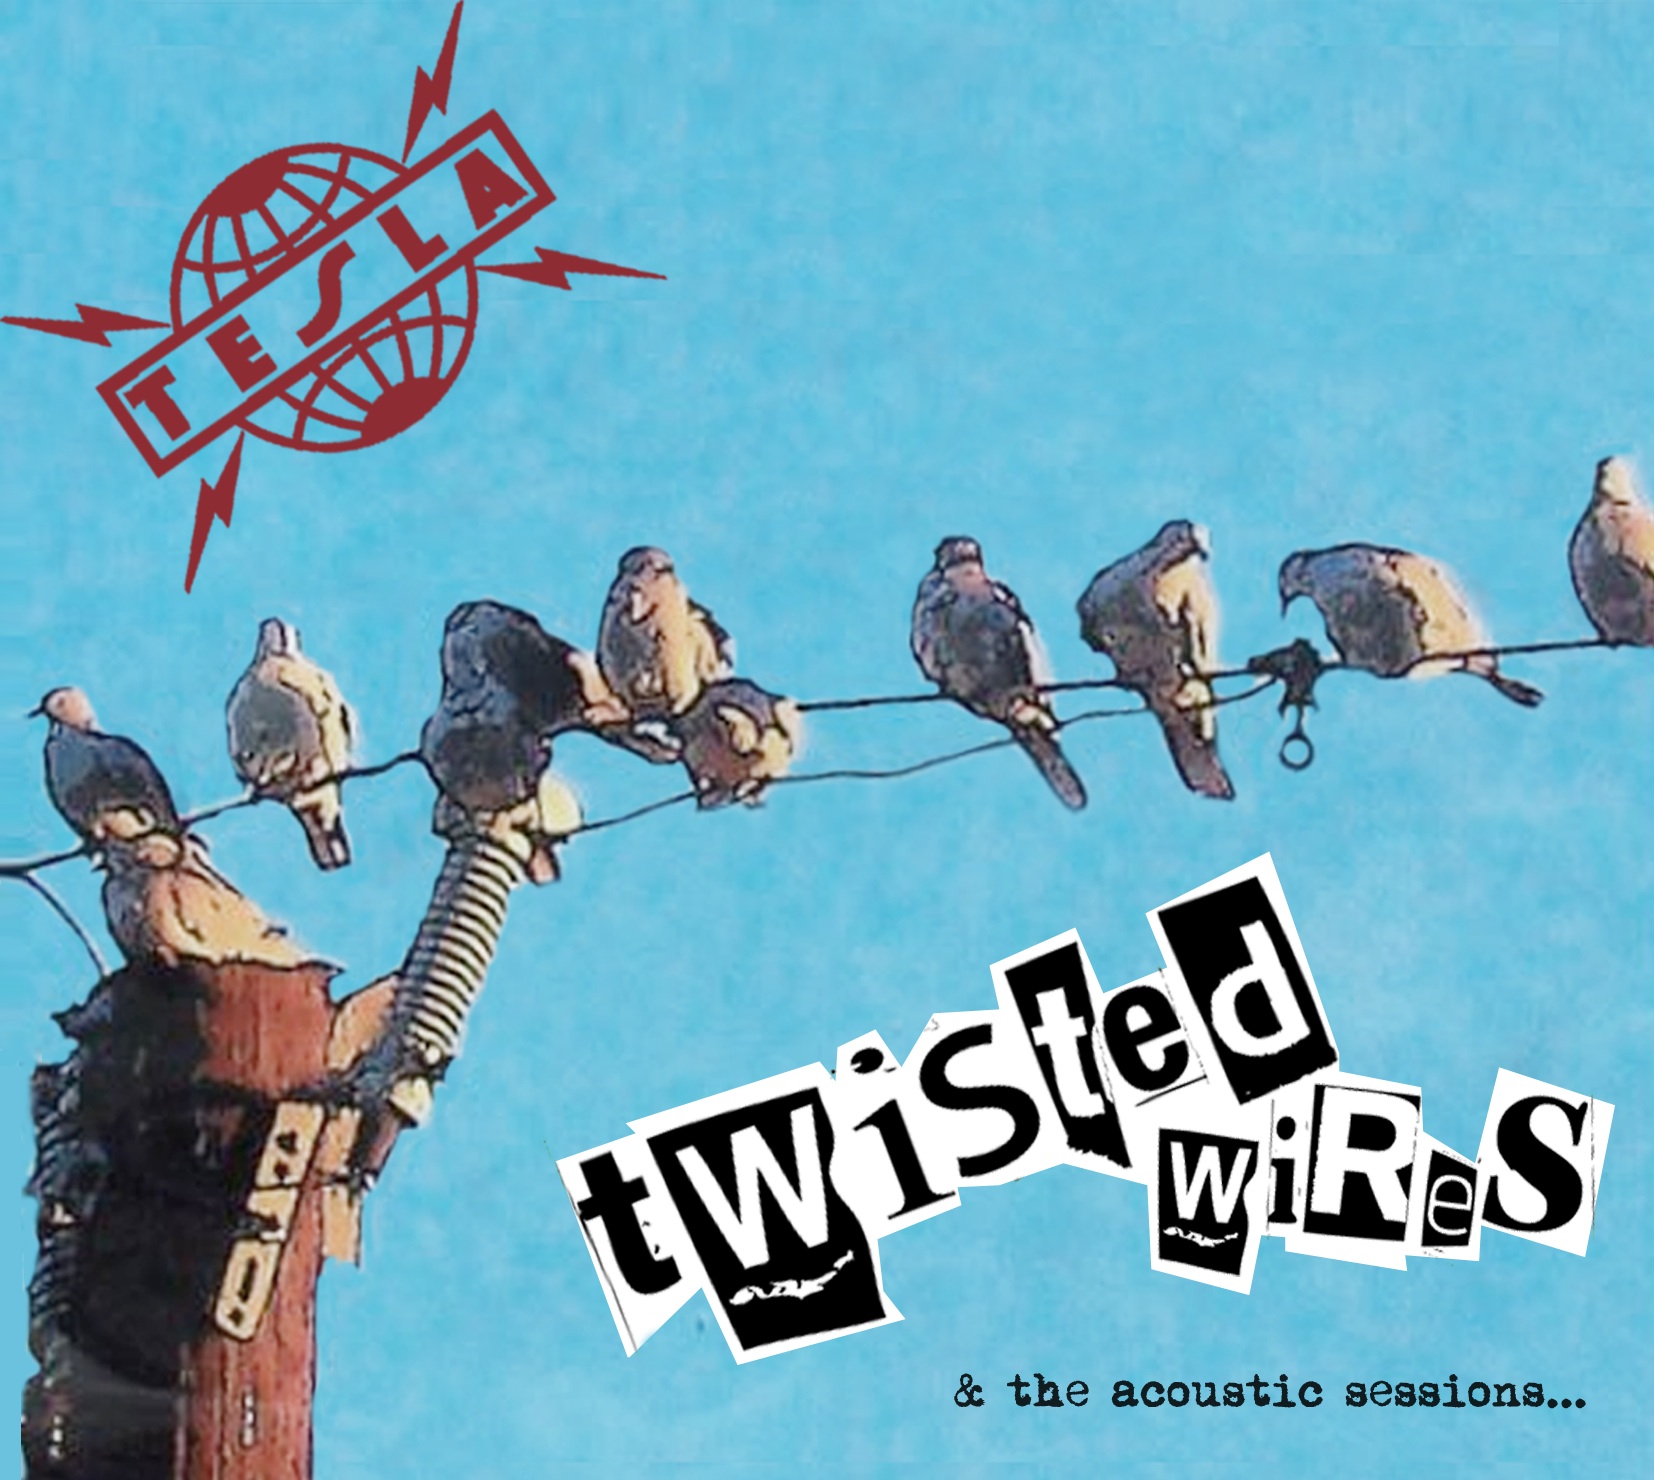 TWISTED WIRES